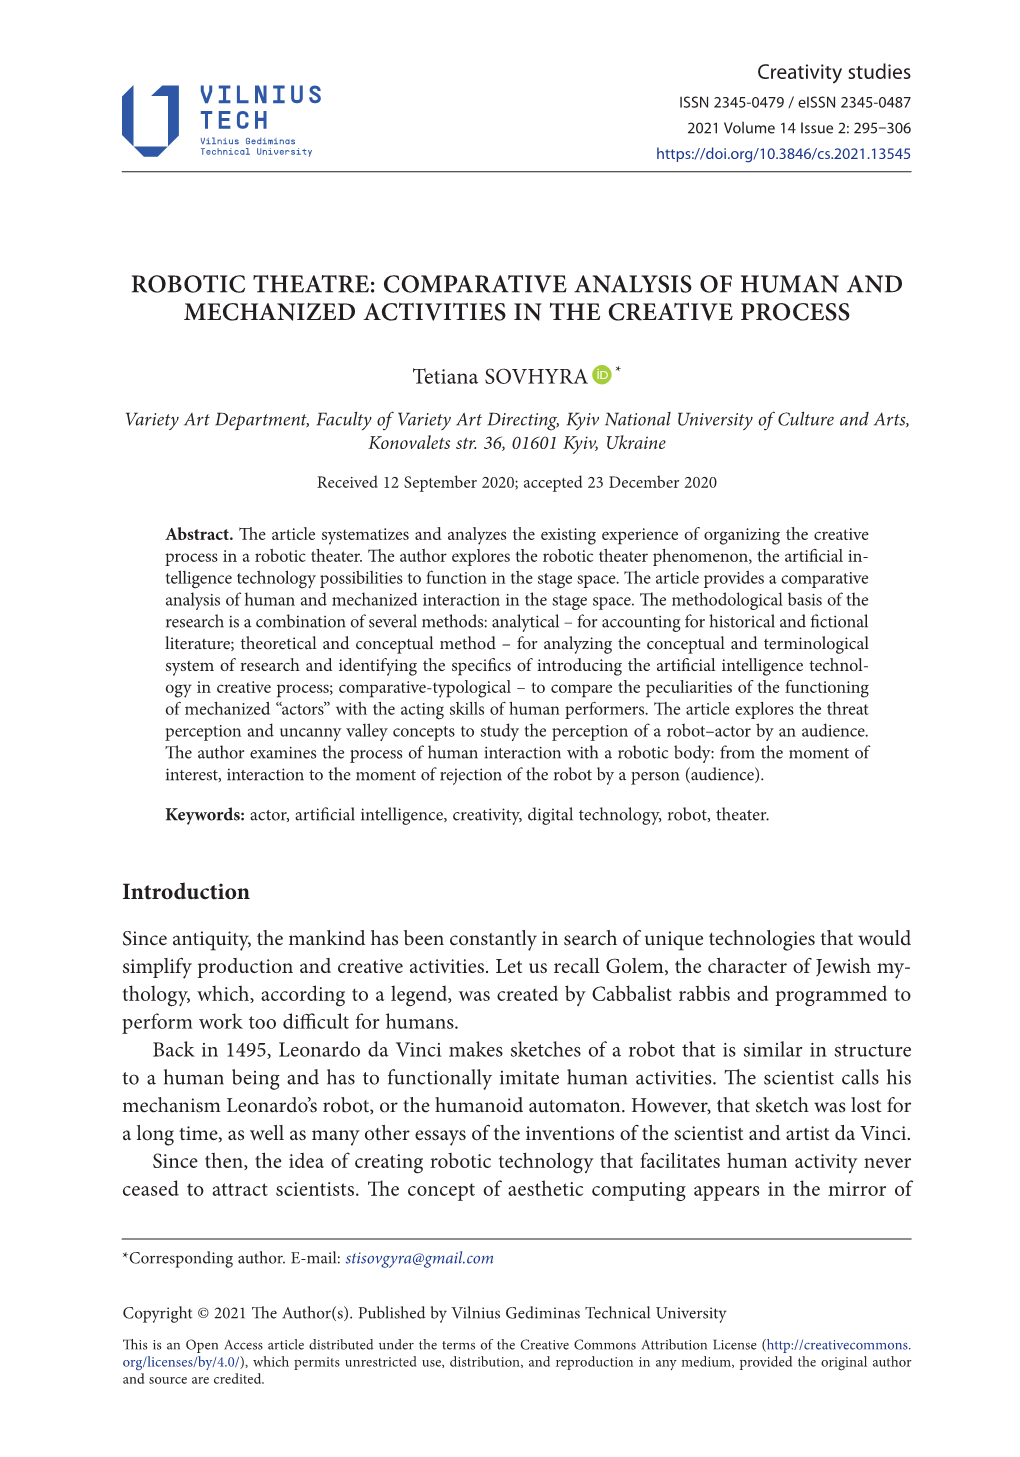 Robotic Theatre: Comparative Analysis of Human and Mechanized Activities in the Creative Process